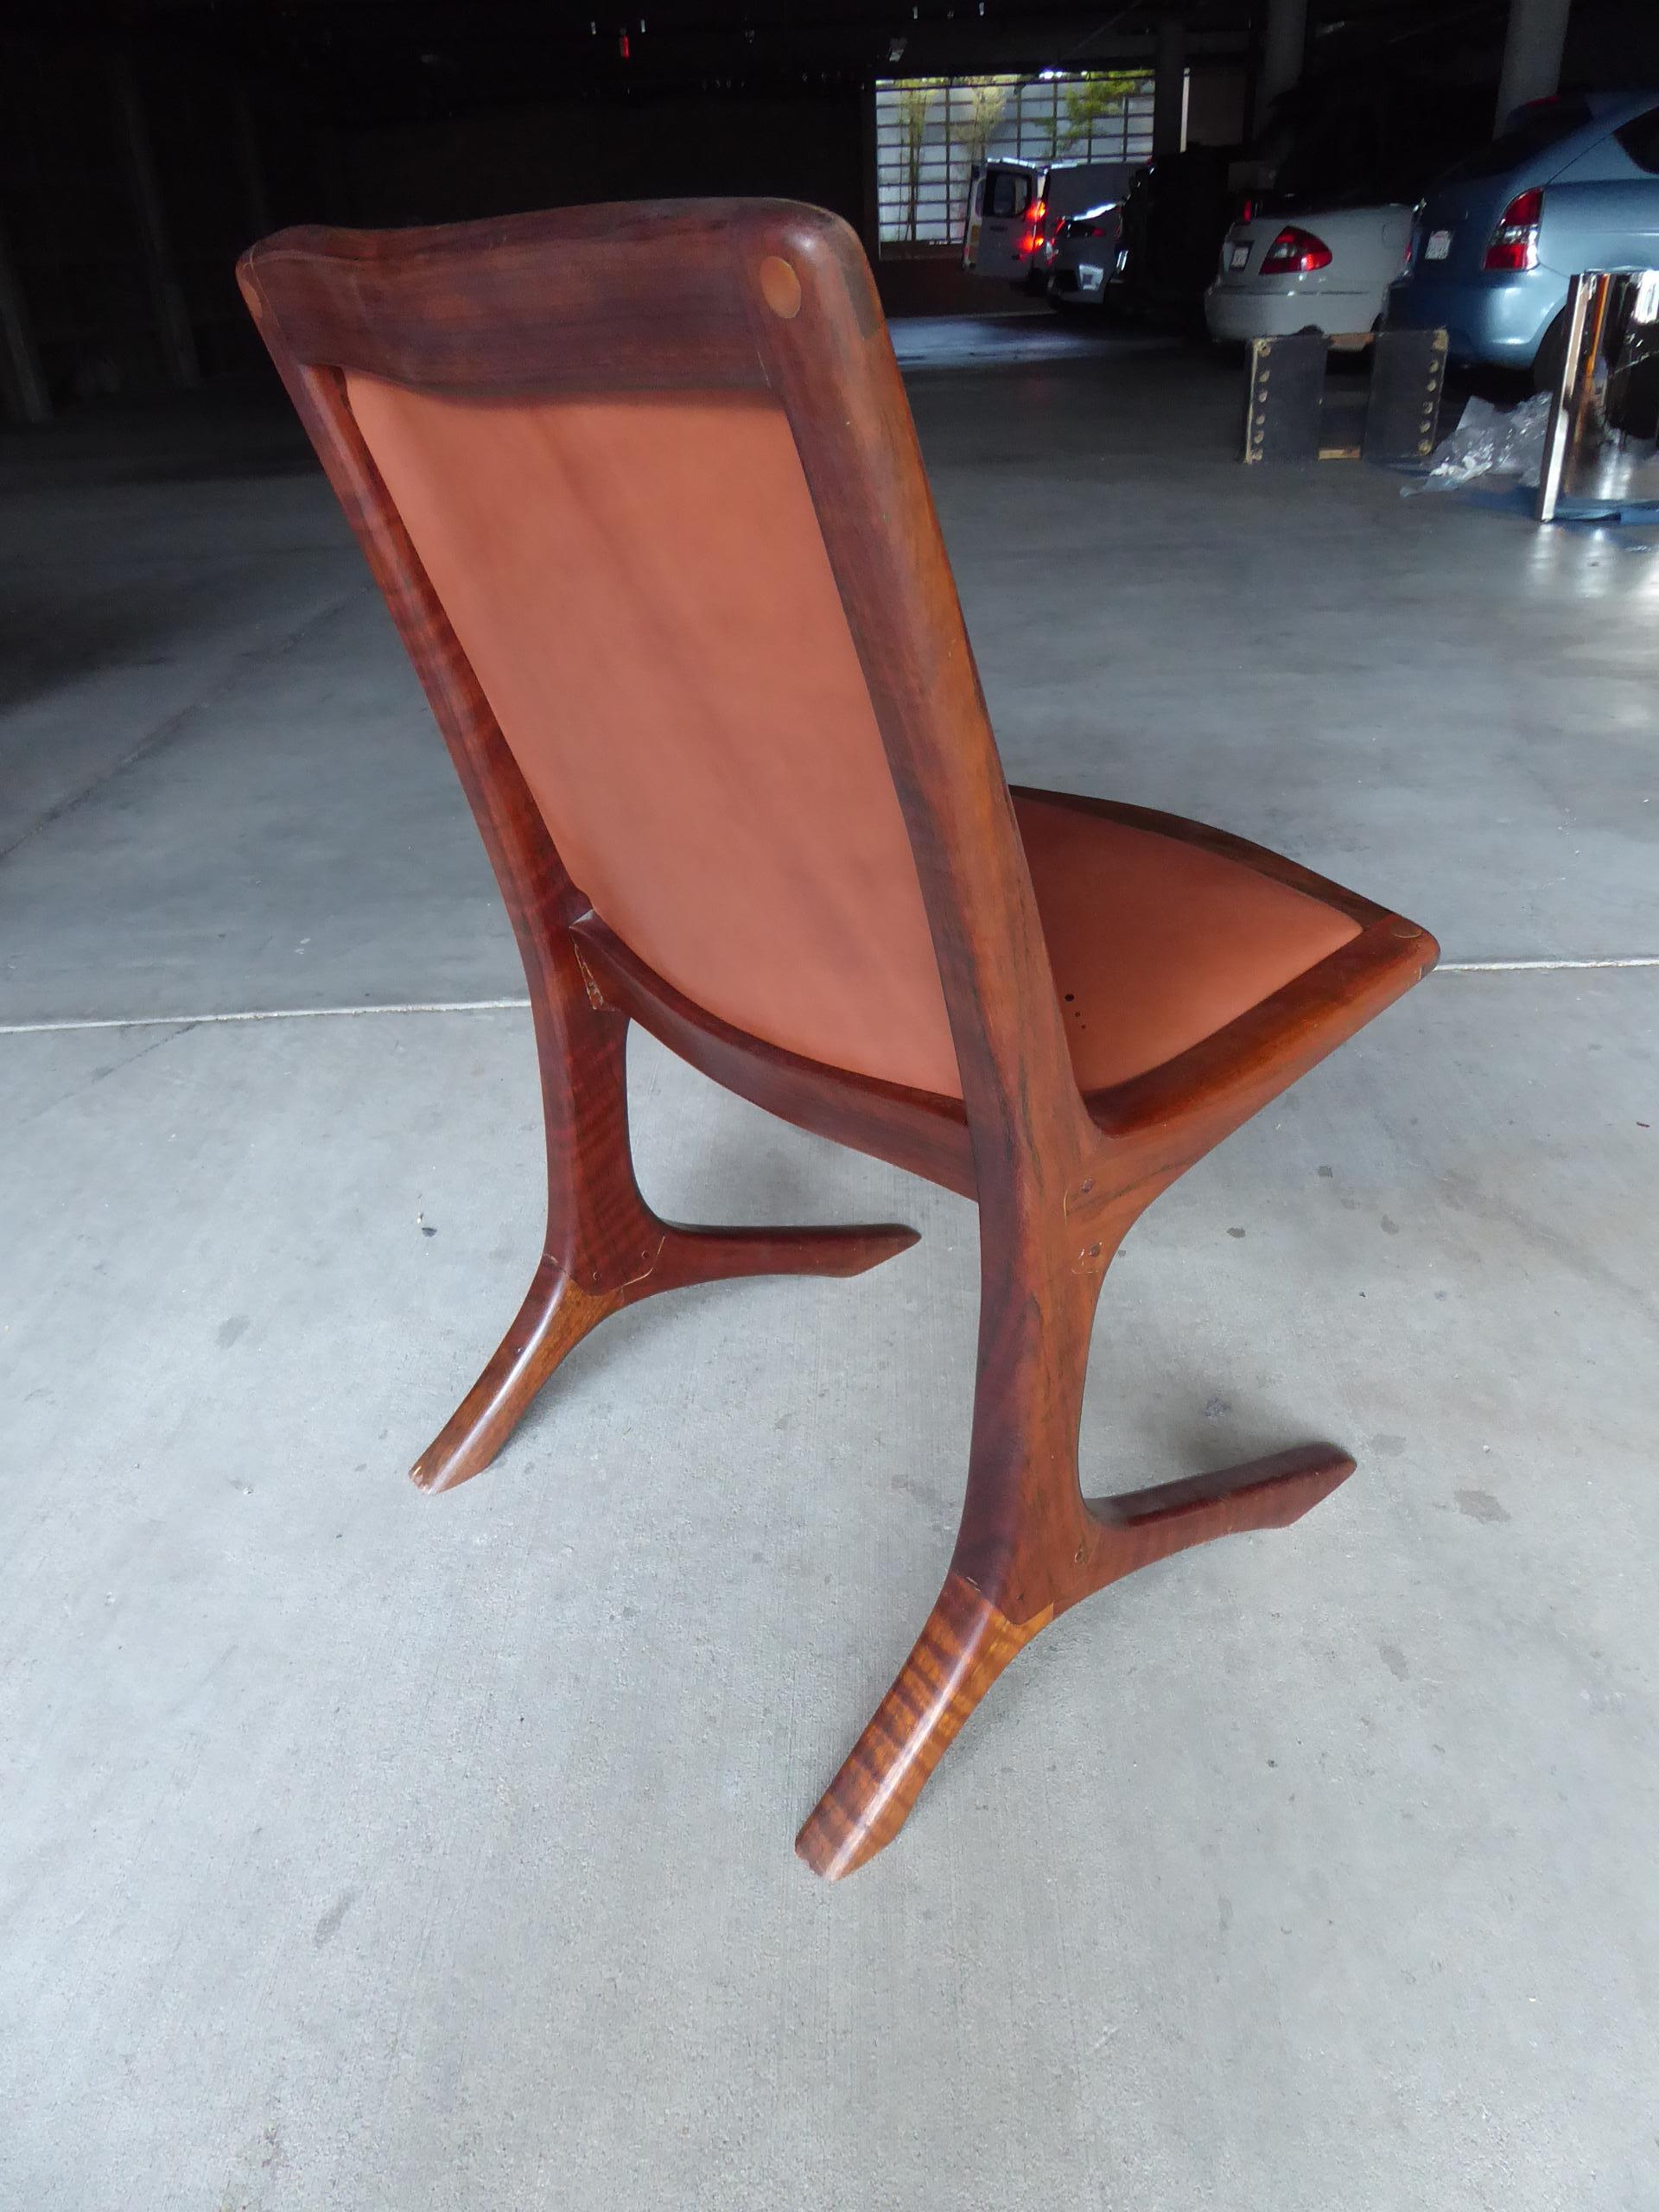 Hand Built Lift-Top Desk and Chair by California Artist Dale Holub circa 1970s For Sale 11